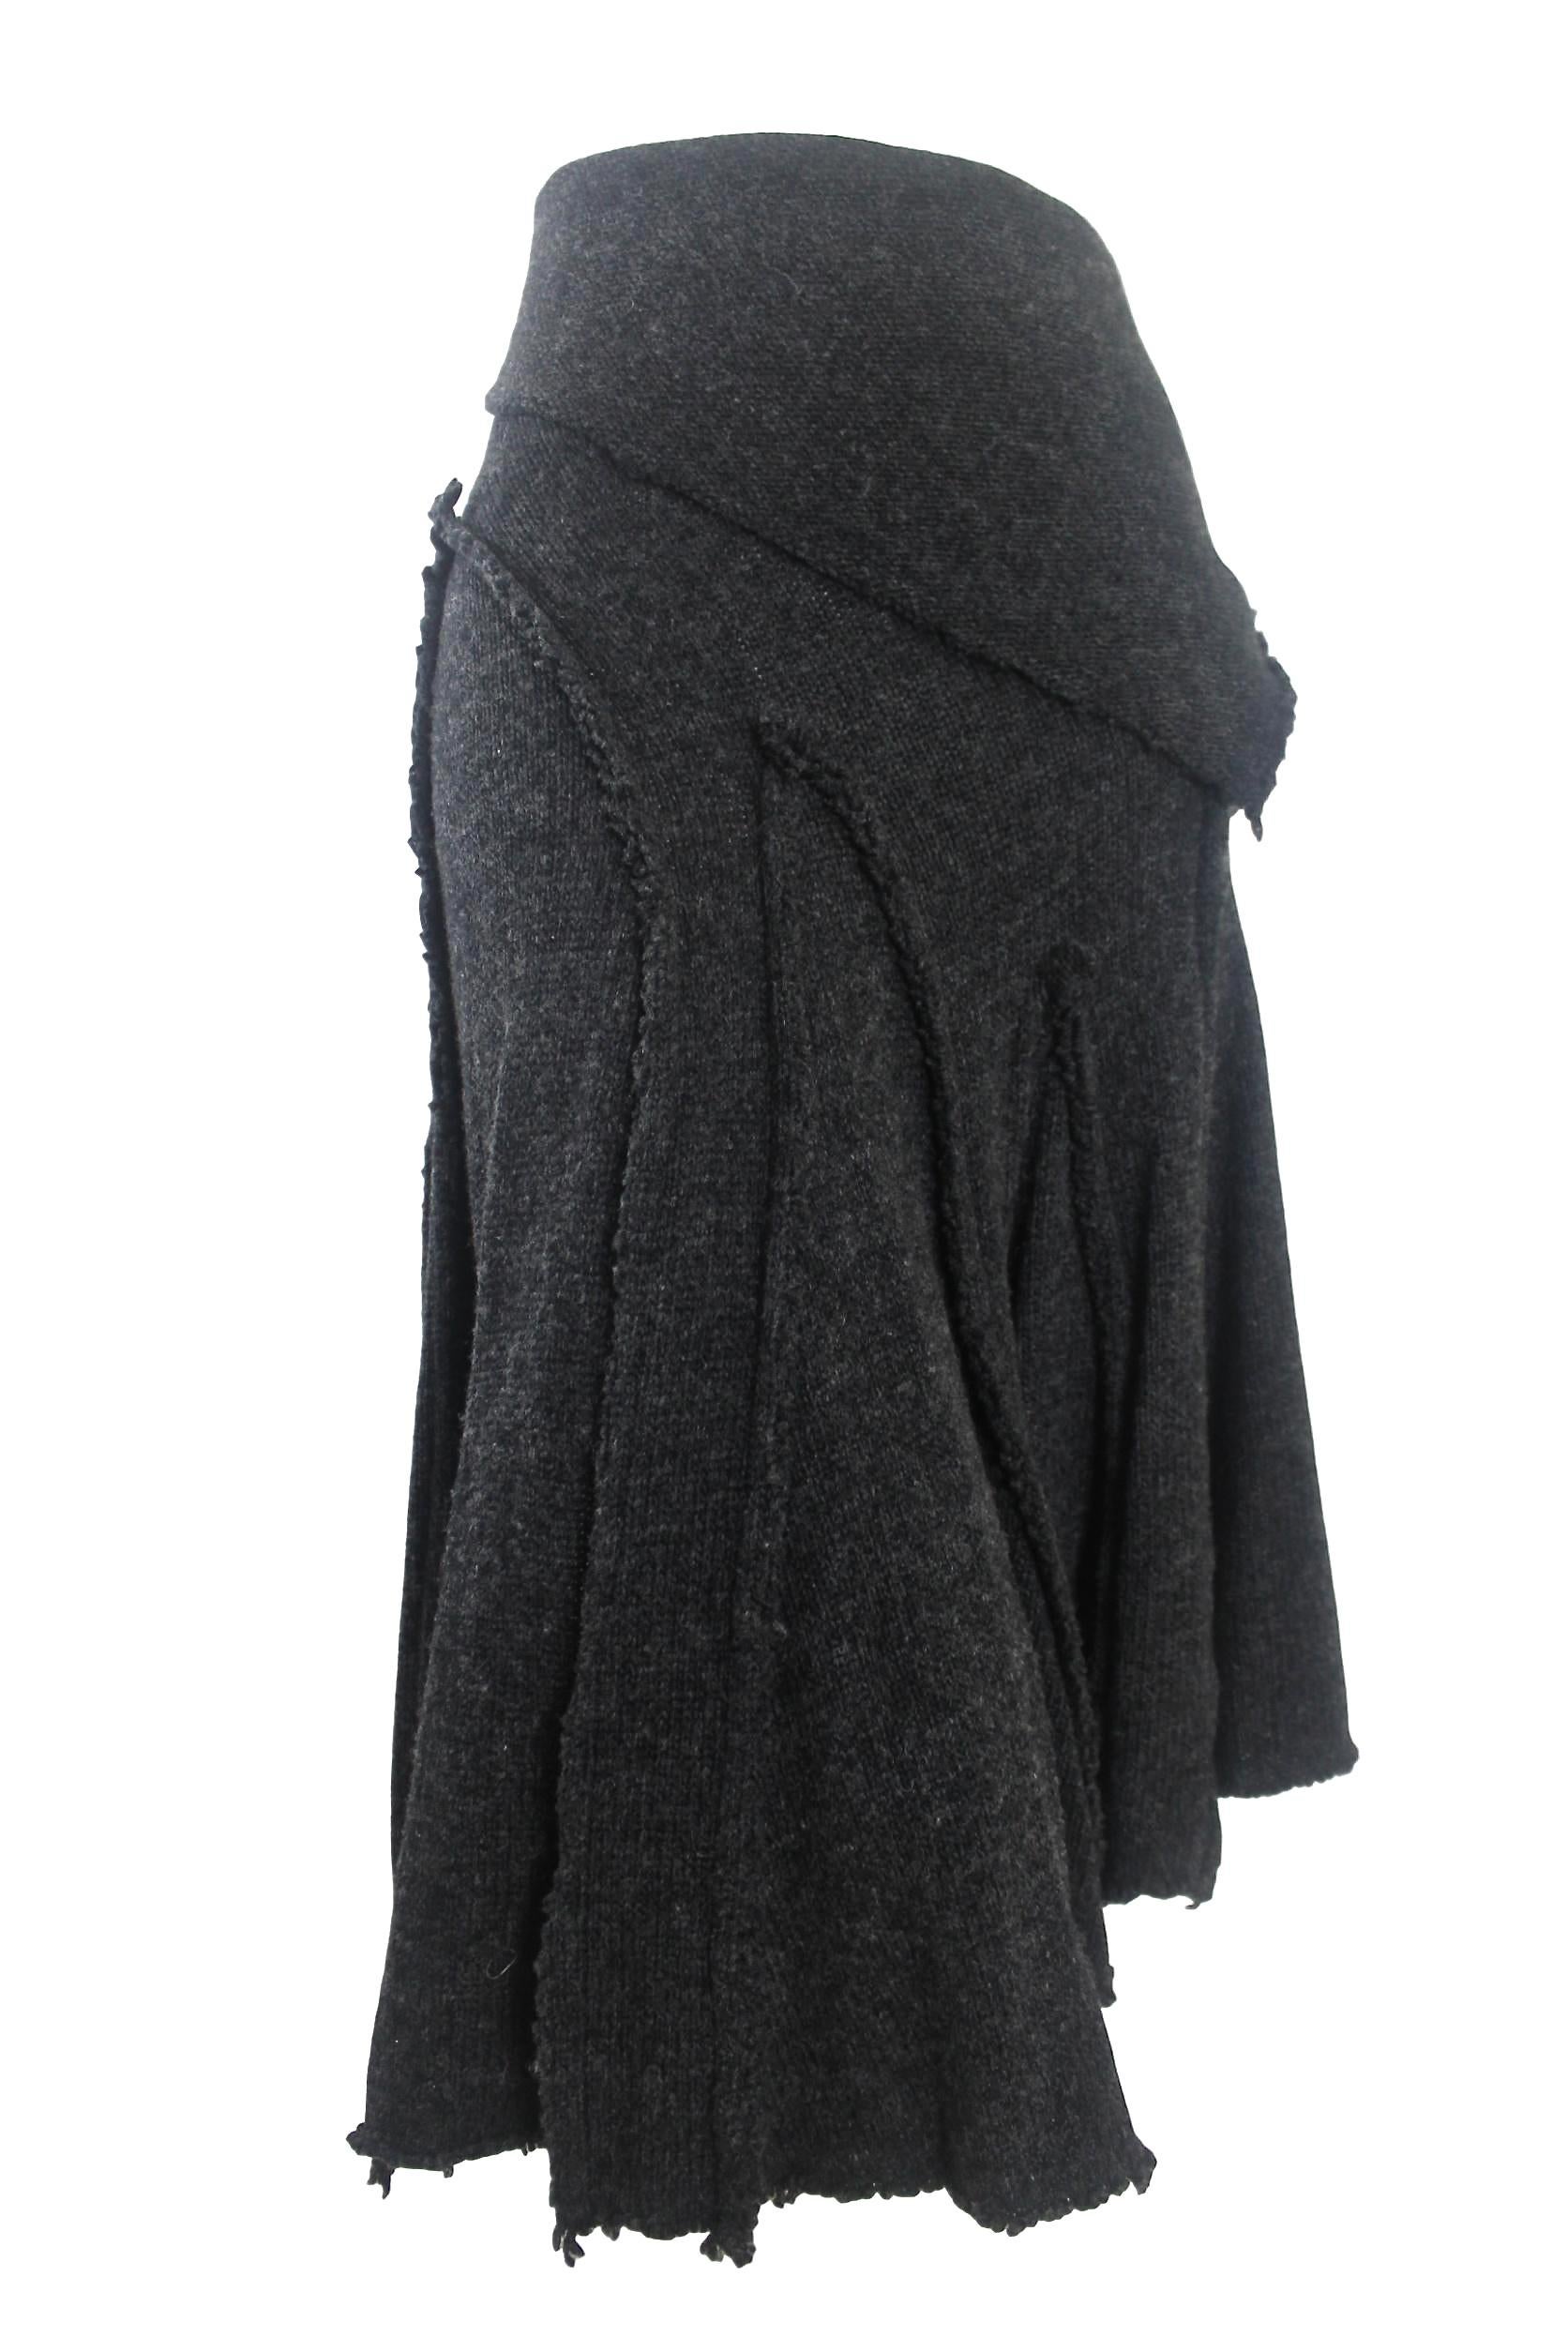 Come des Garcons 2002 Collection Wool Knit Skirt For Sale 3